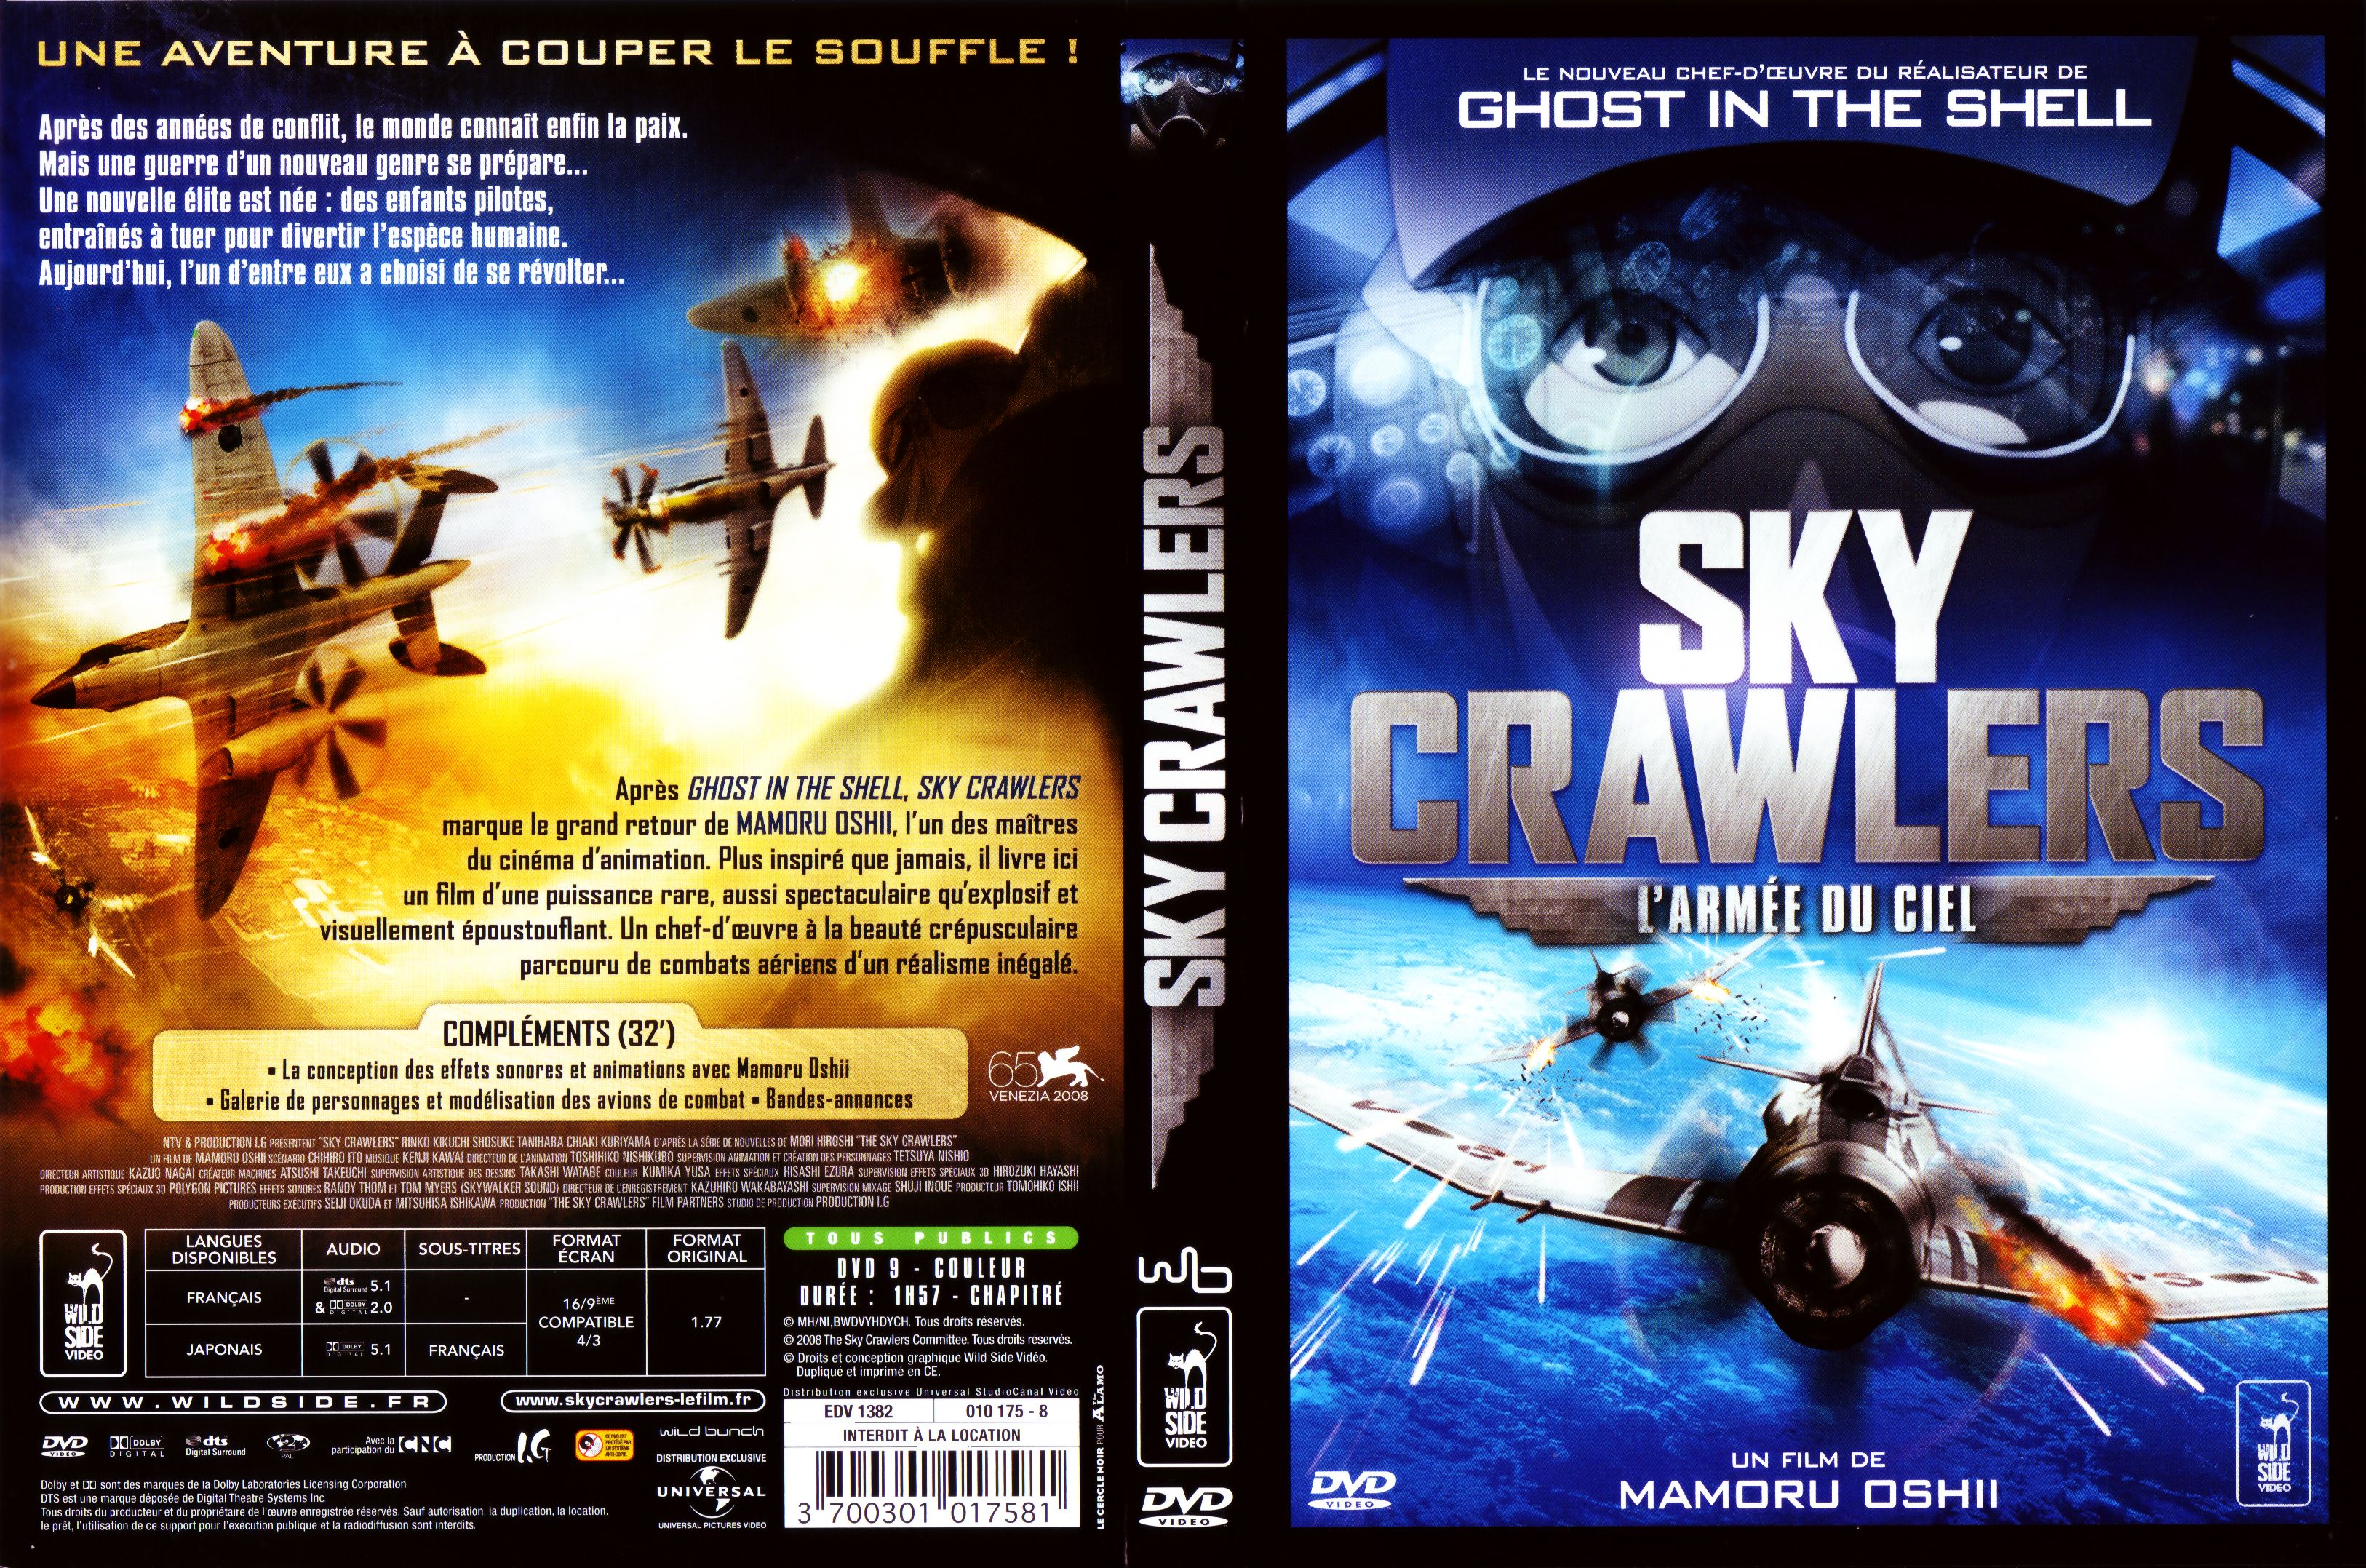 Jaquette DVD Sky Crawlers